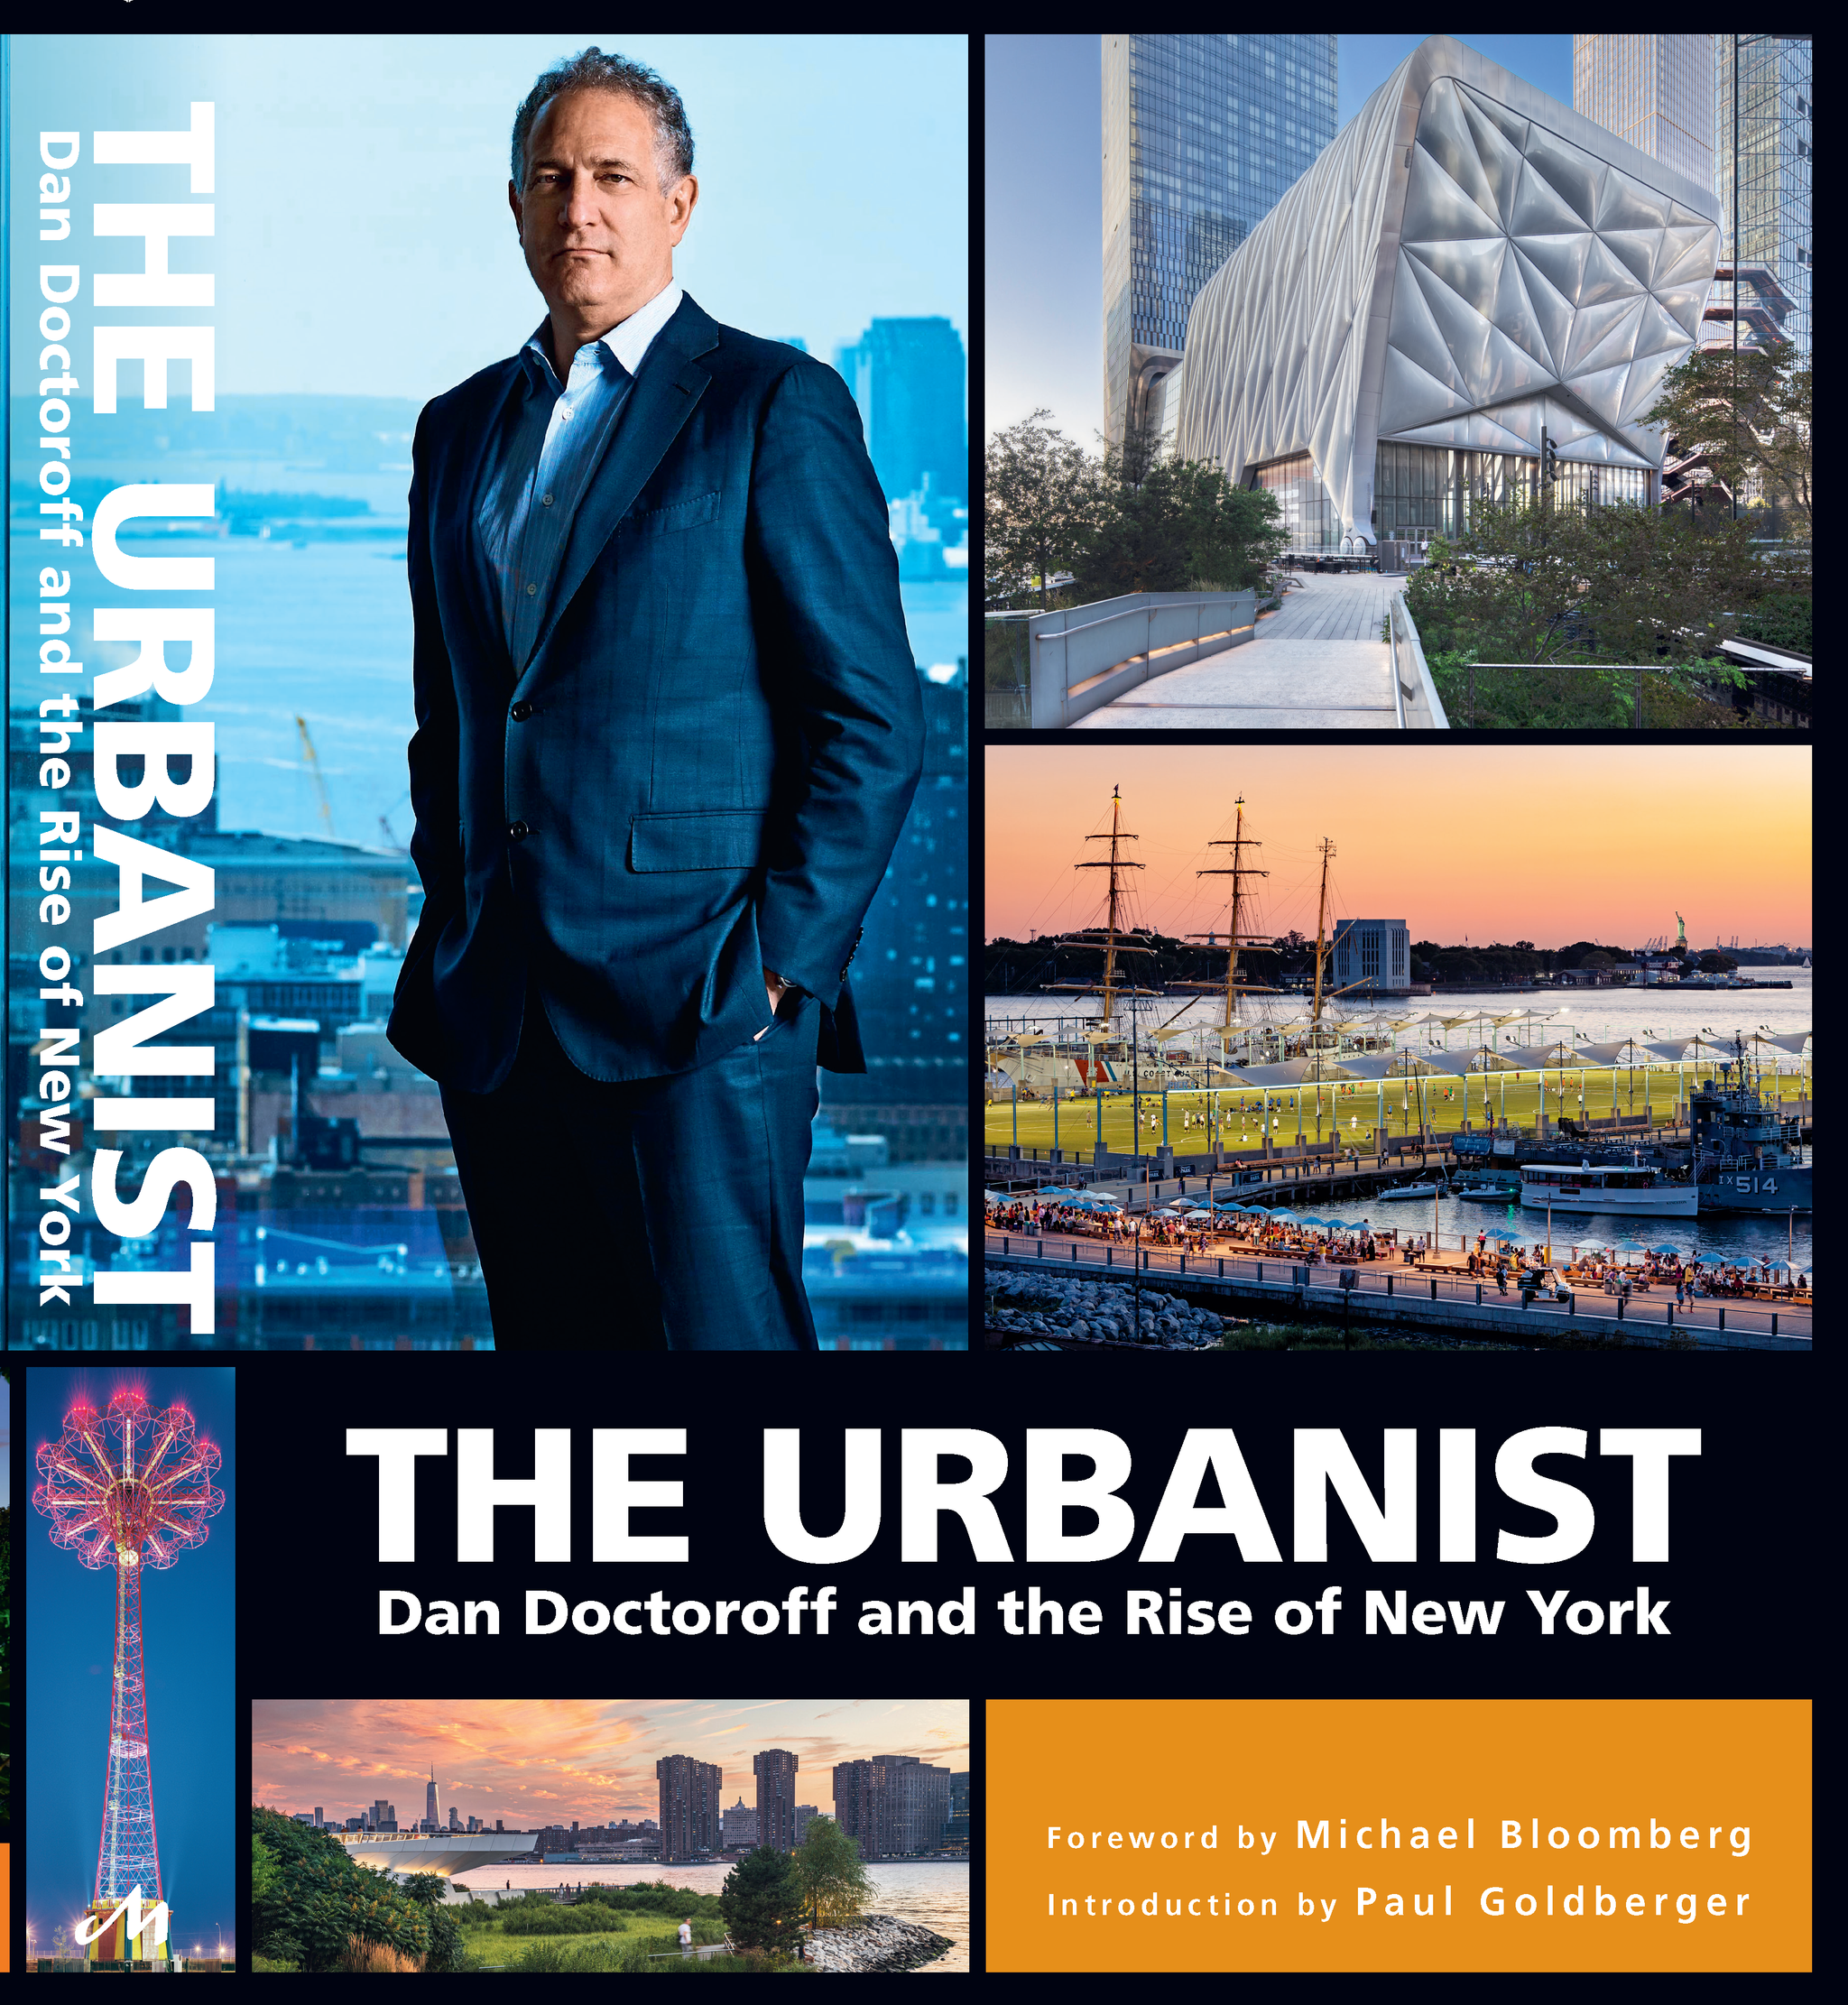 The book cover of The Urbanist with images of different urban development projects in New York City, including The Shed. In one image, Dan Doctoroff stands proudly in front of a panoramic view of the city seen from the windows of a skyscraper.